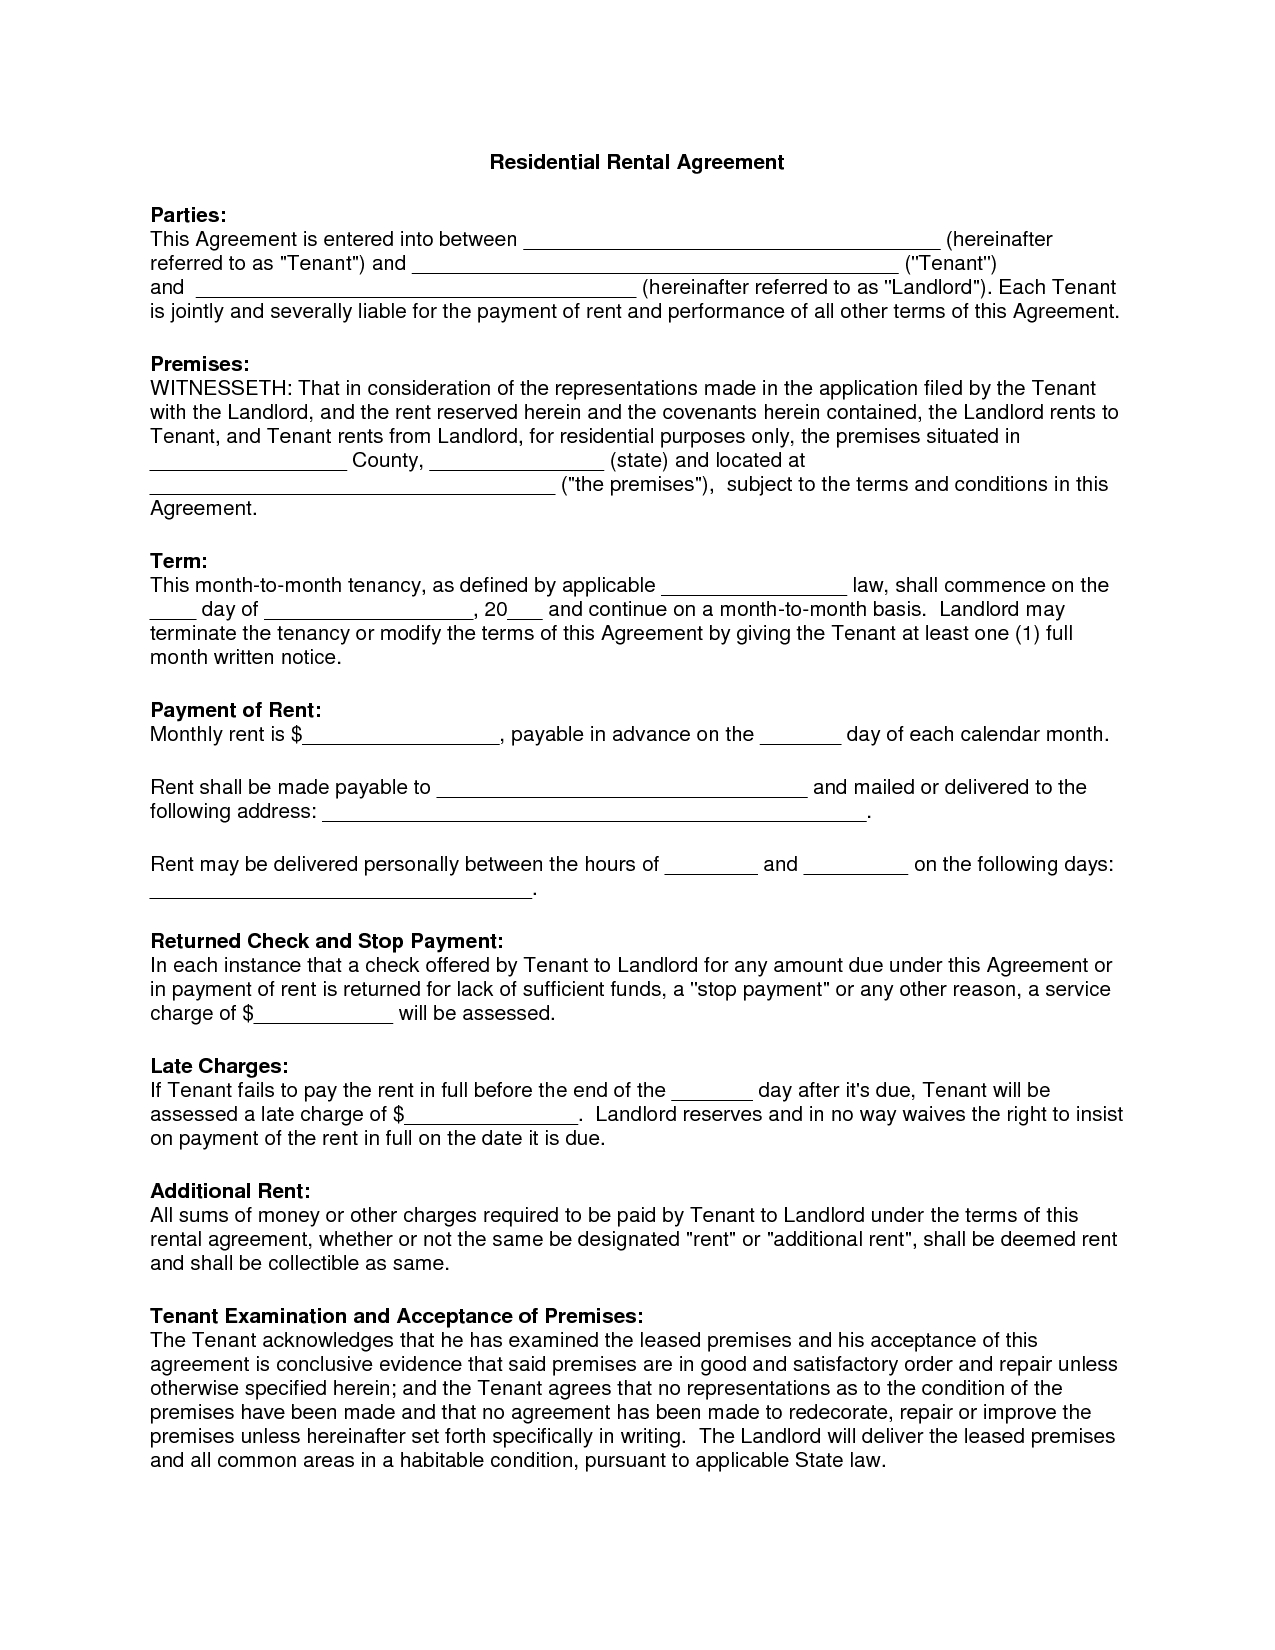 Free Copy Rental Lease Agreement | Residential Rental Agreement - Apartment Lease Agreement Free Printable